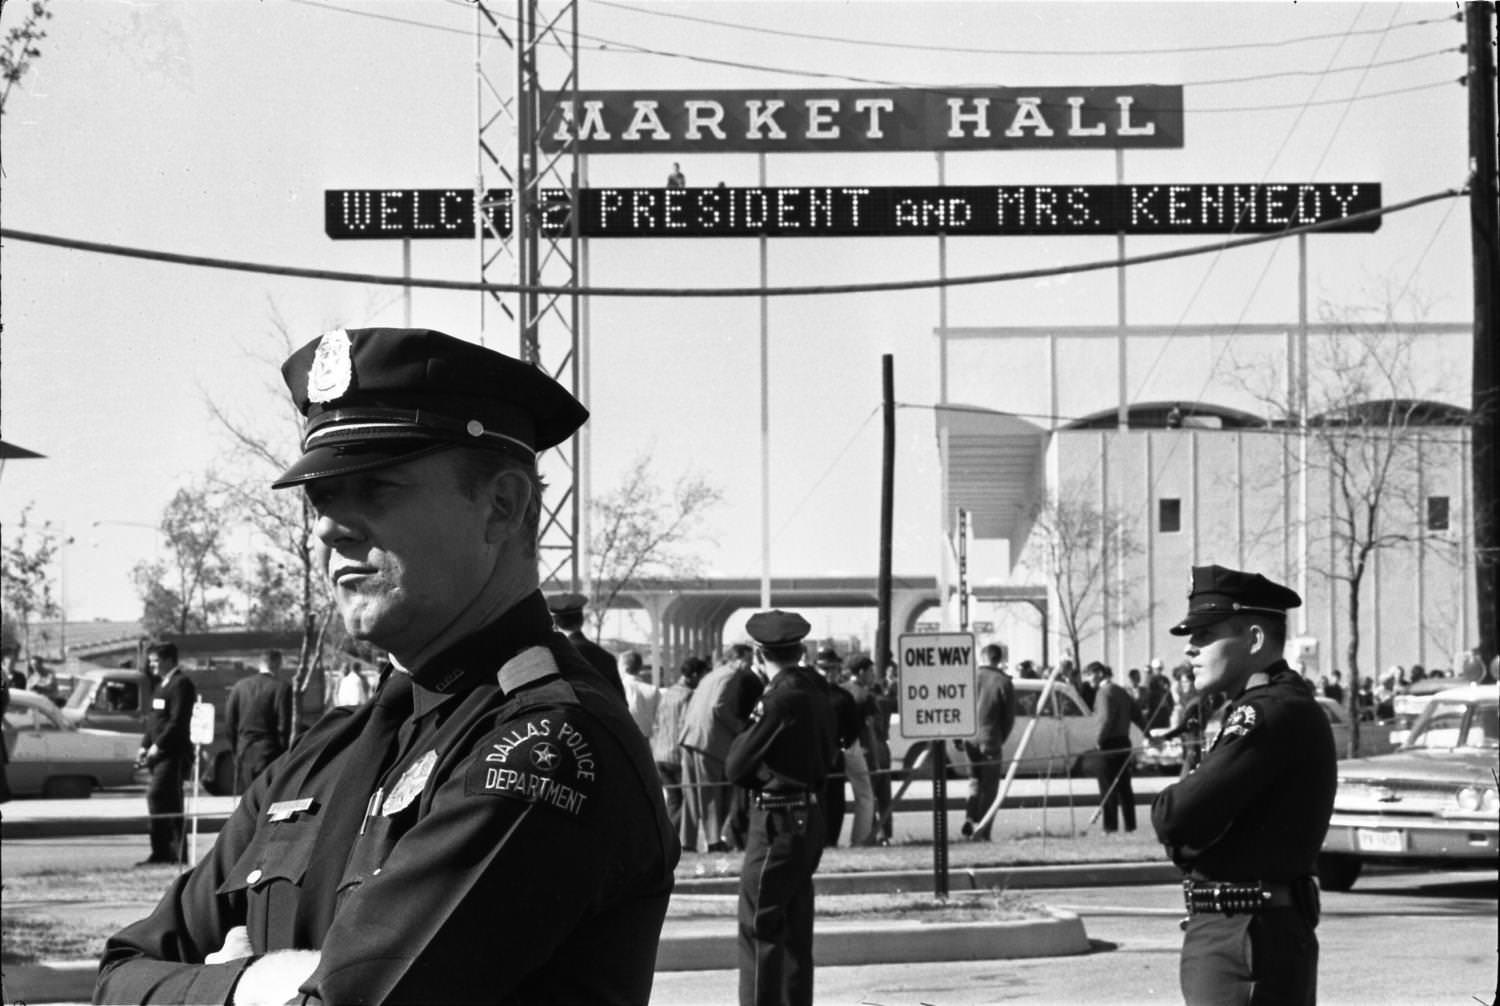 Dallas Police officers standing guard outside the Dallas Trade Mart, 1963